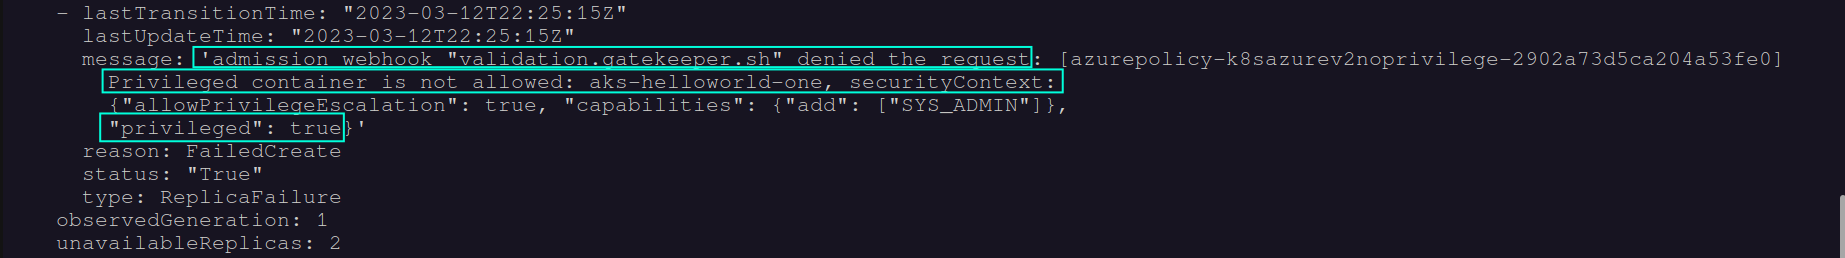 Screenshot of the non-compliant Deployment being denied by enforced Azure Policy definition for disallowing usage of container privileged mode